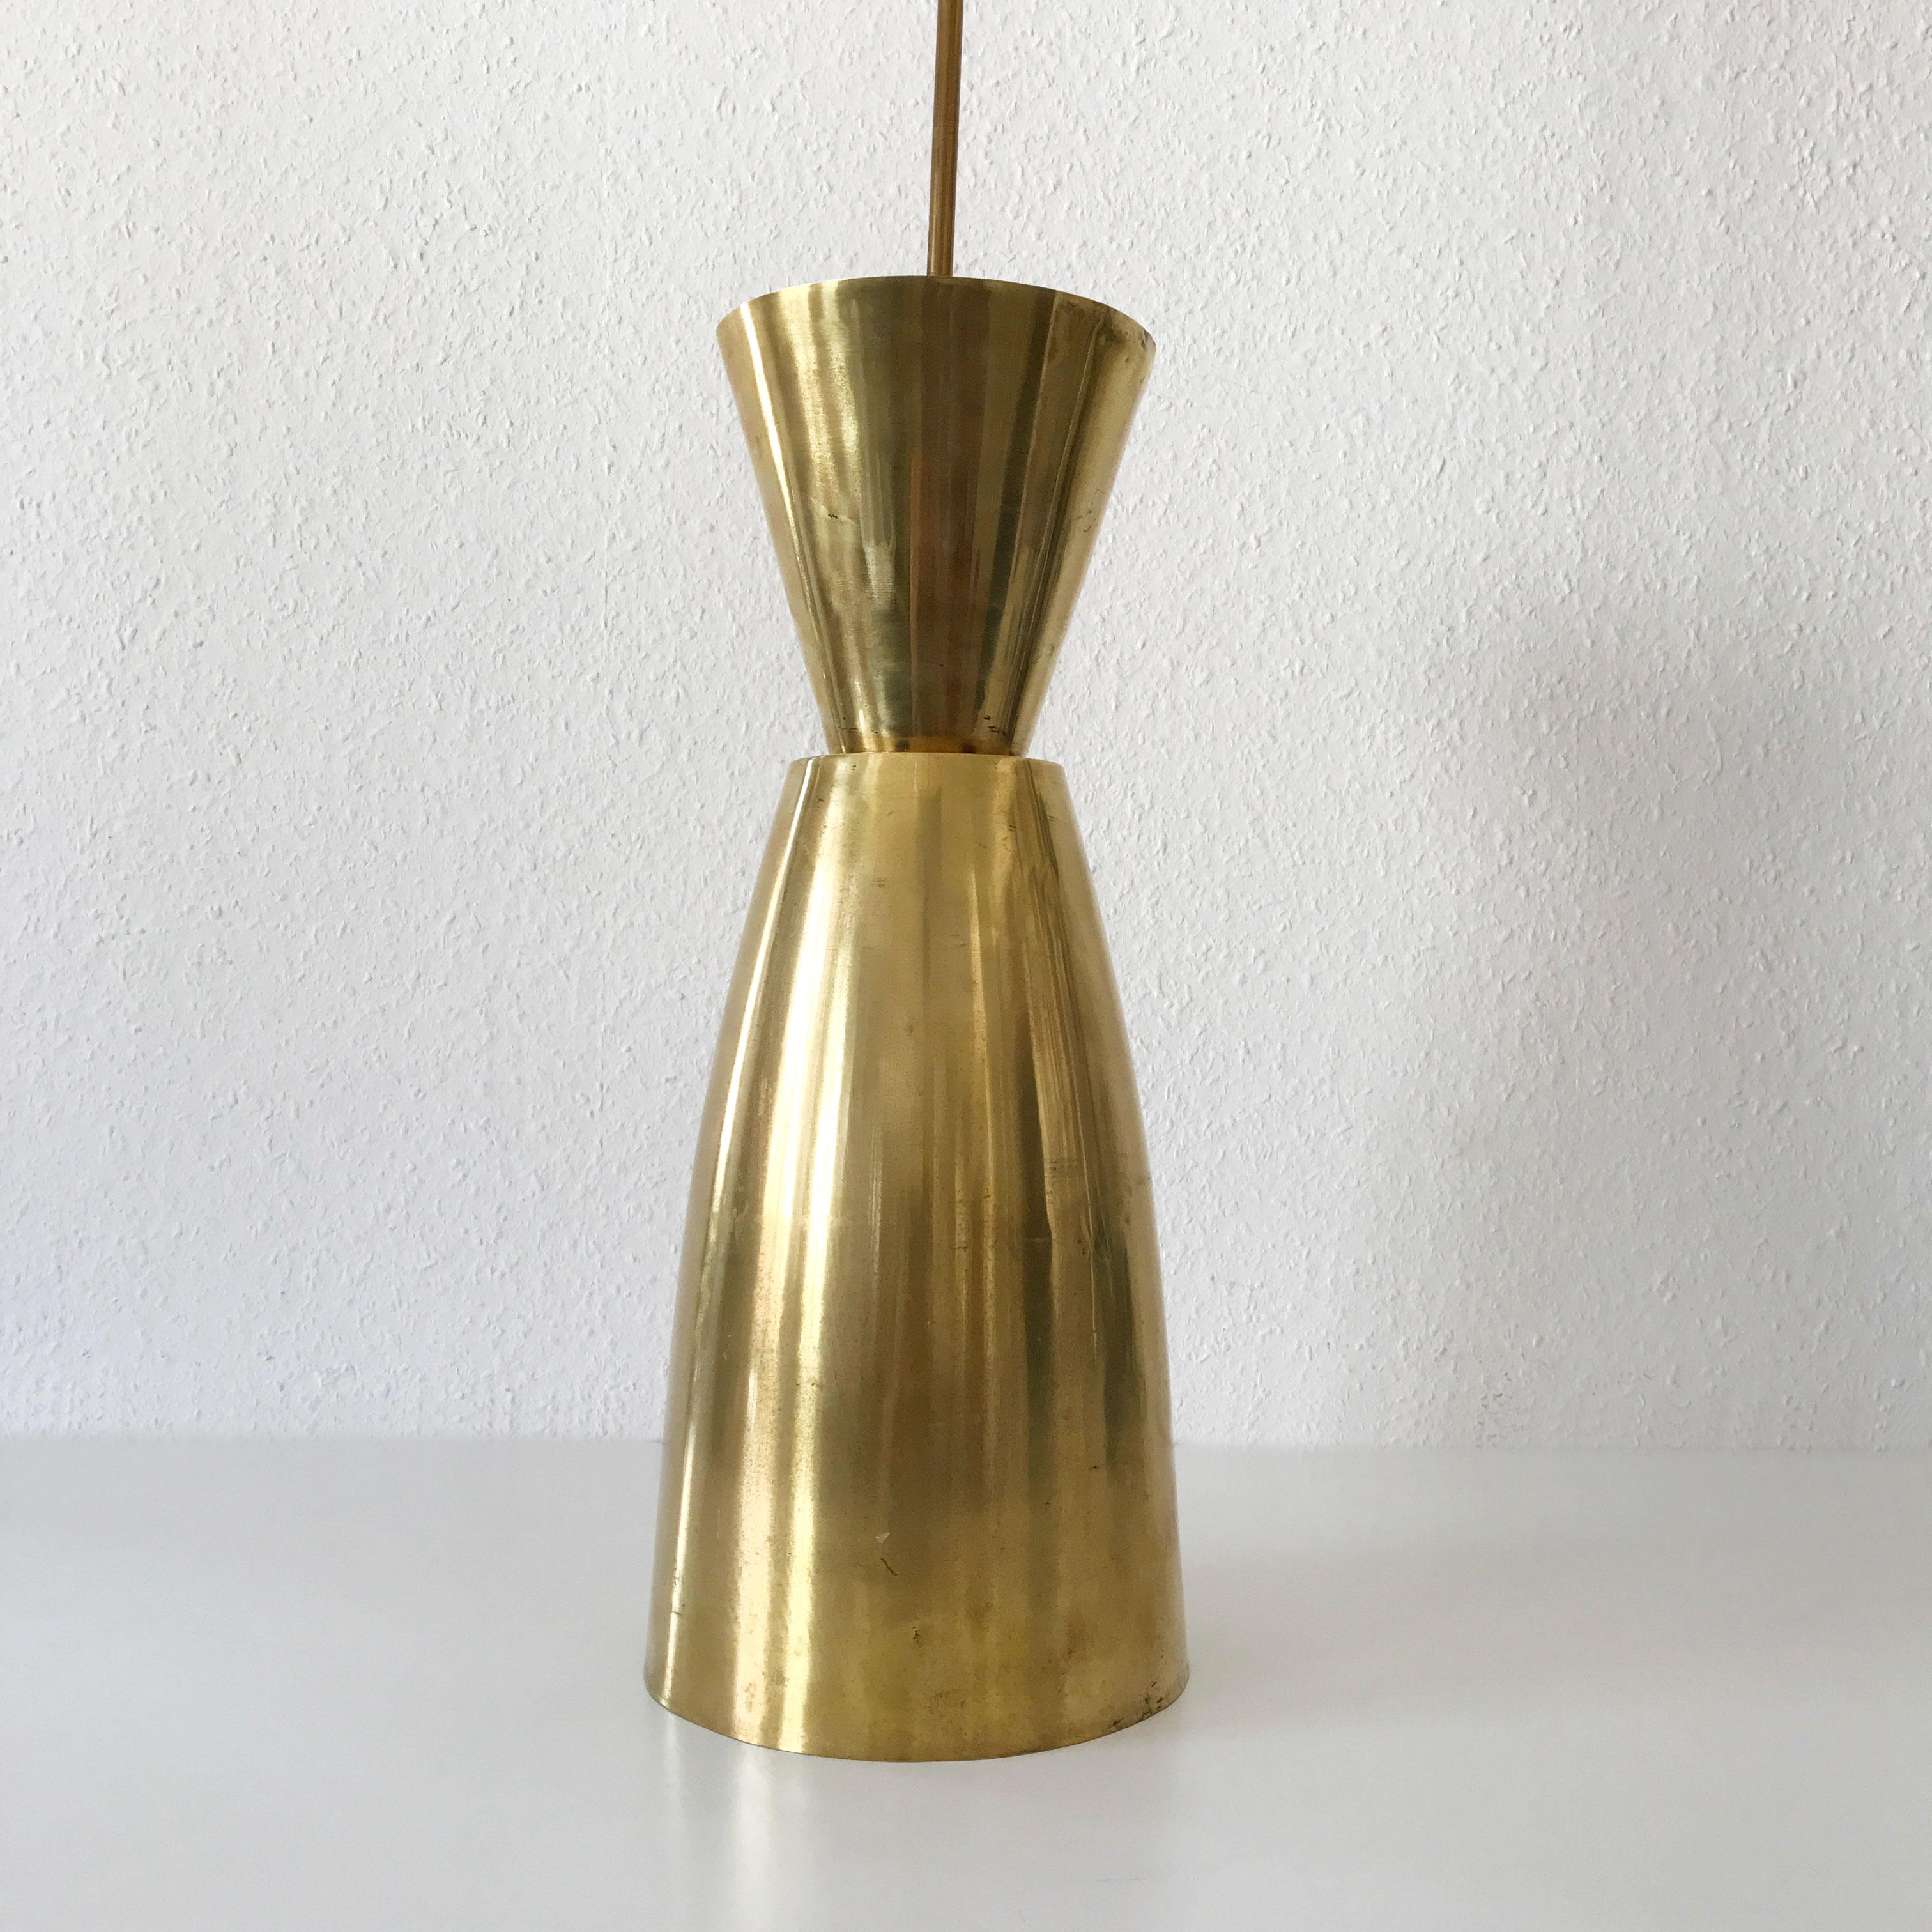 Large Mid-Century Modern Diabolo Brass Pendant Lamp, 1950s, Germany For Sale 5